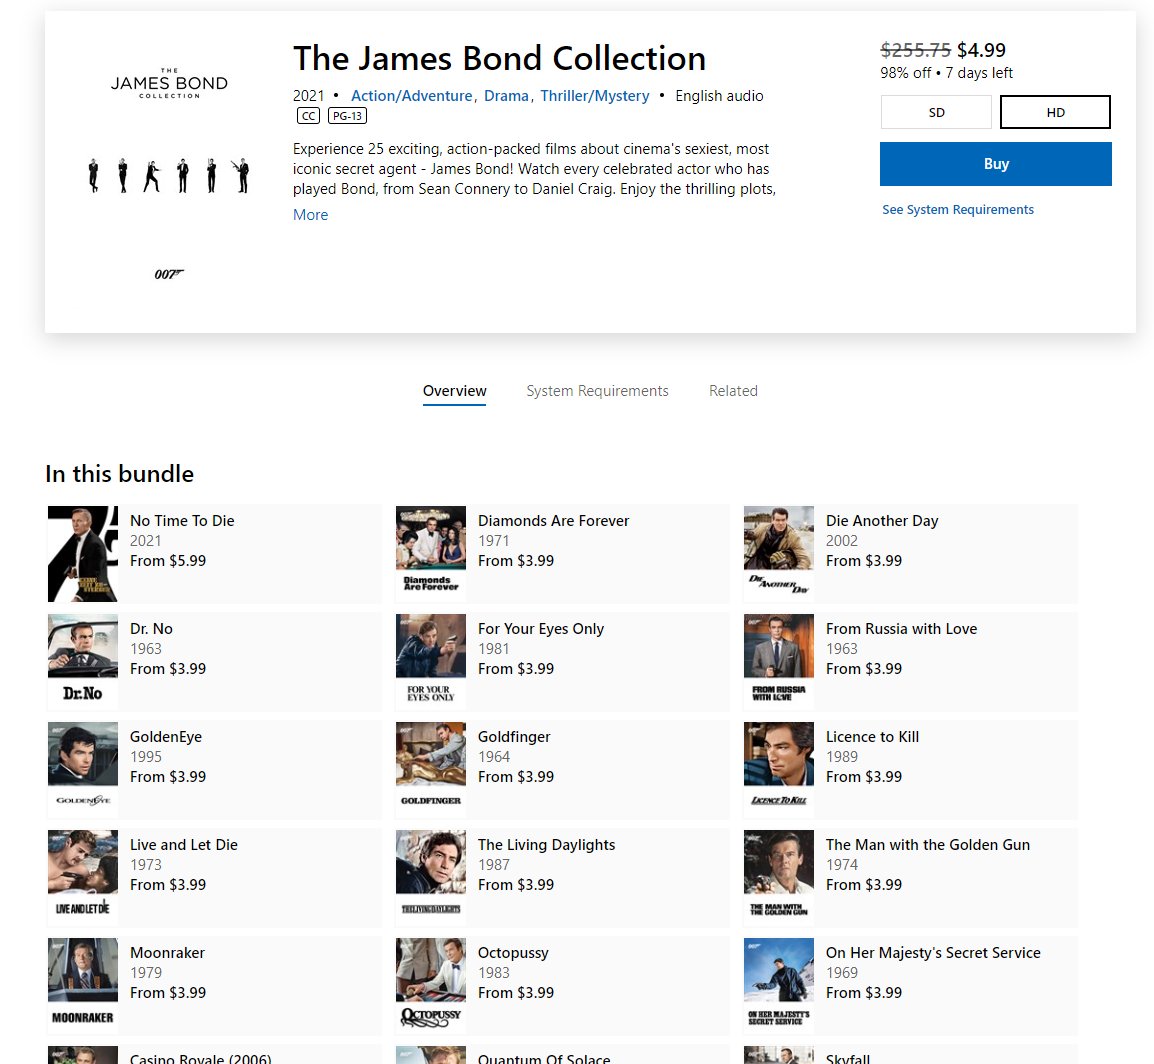 PRICE ERROR ON ENTIRE JAMES BOND MOVIE COLLECTION 🚨

MICROSOFT LISTING 👉 $4.99

(SHOULD BE RETAILING $255.00)

bit.ly/44o44Qg